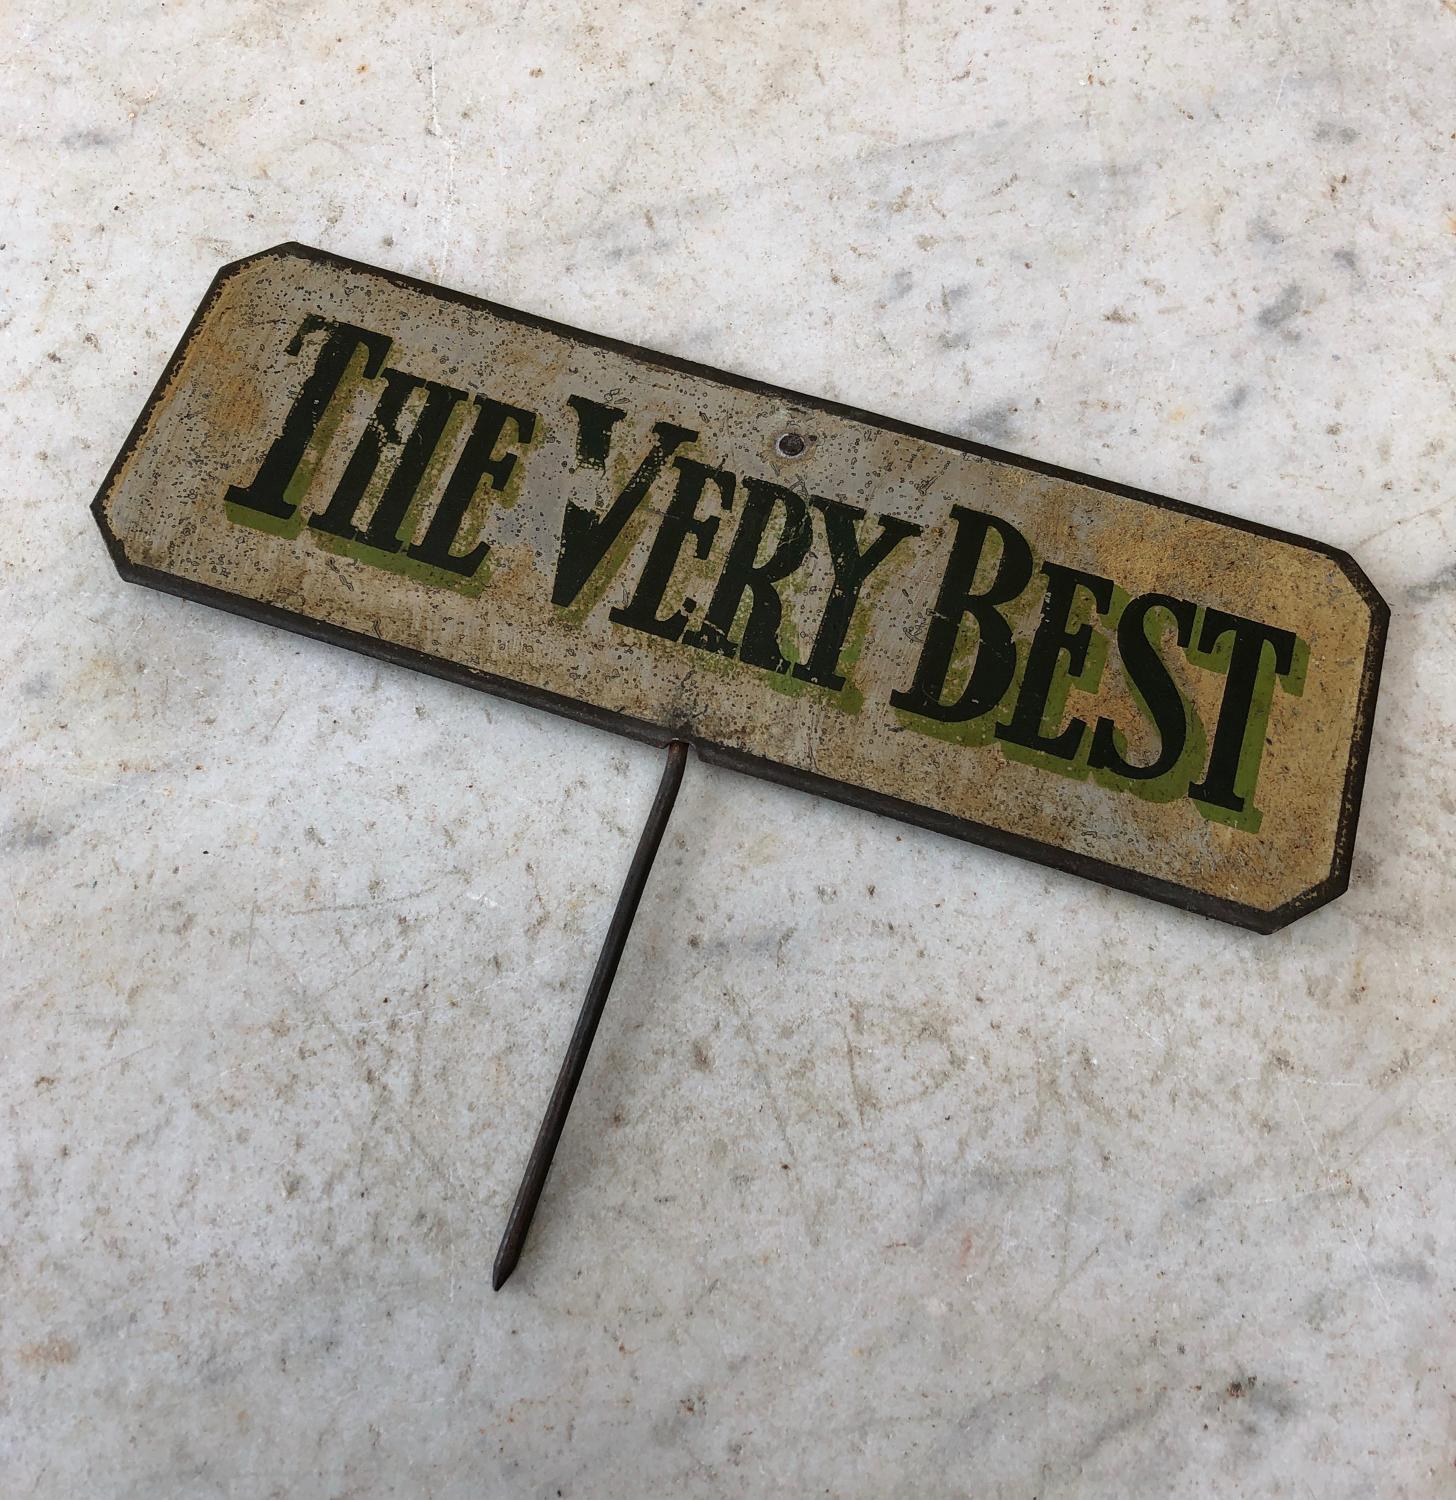 Rare Edwardian Toleware Shops Sign - The Very Best